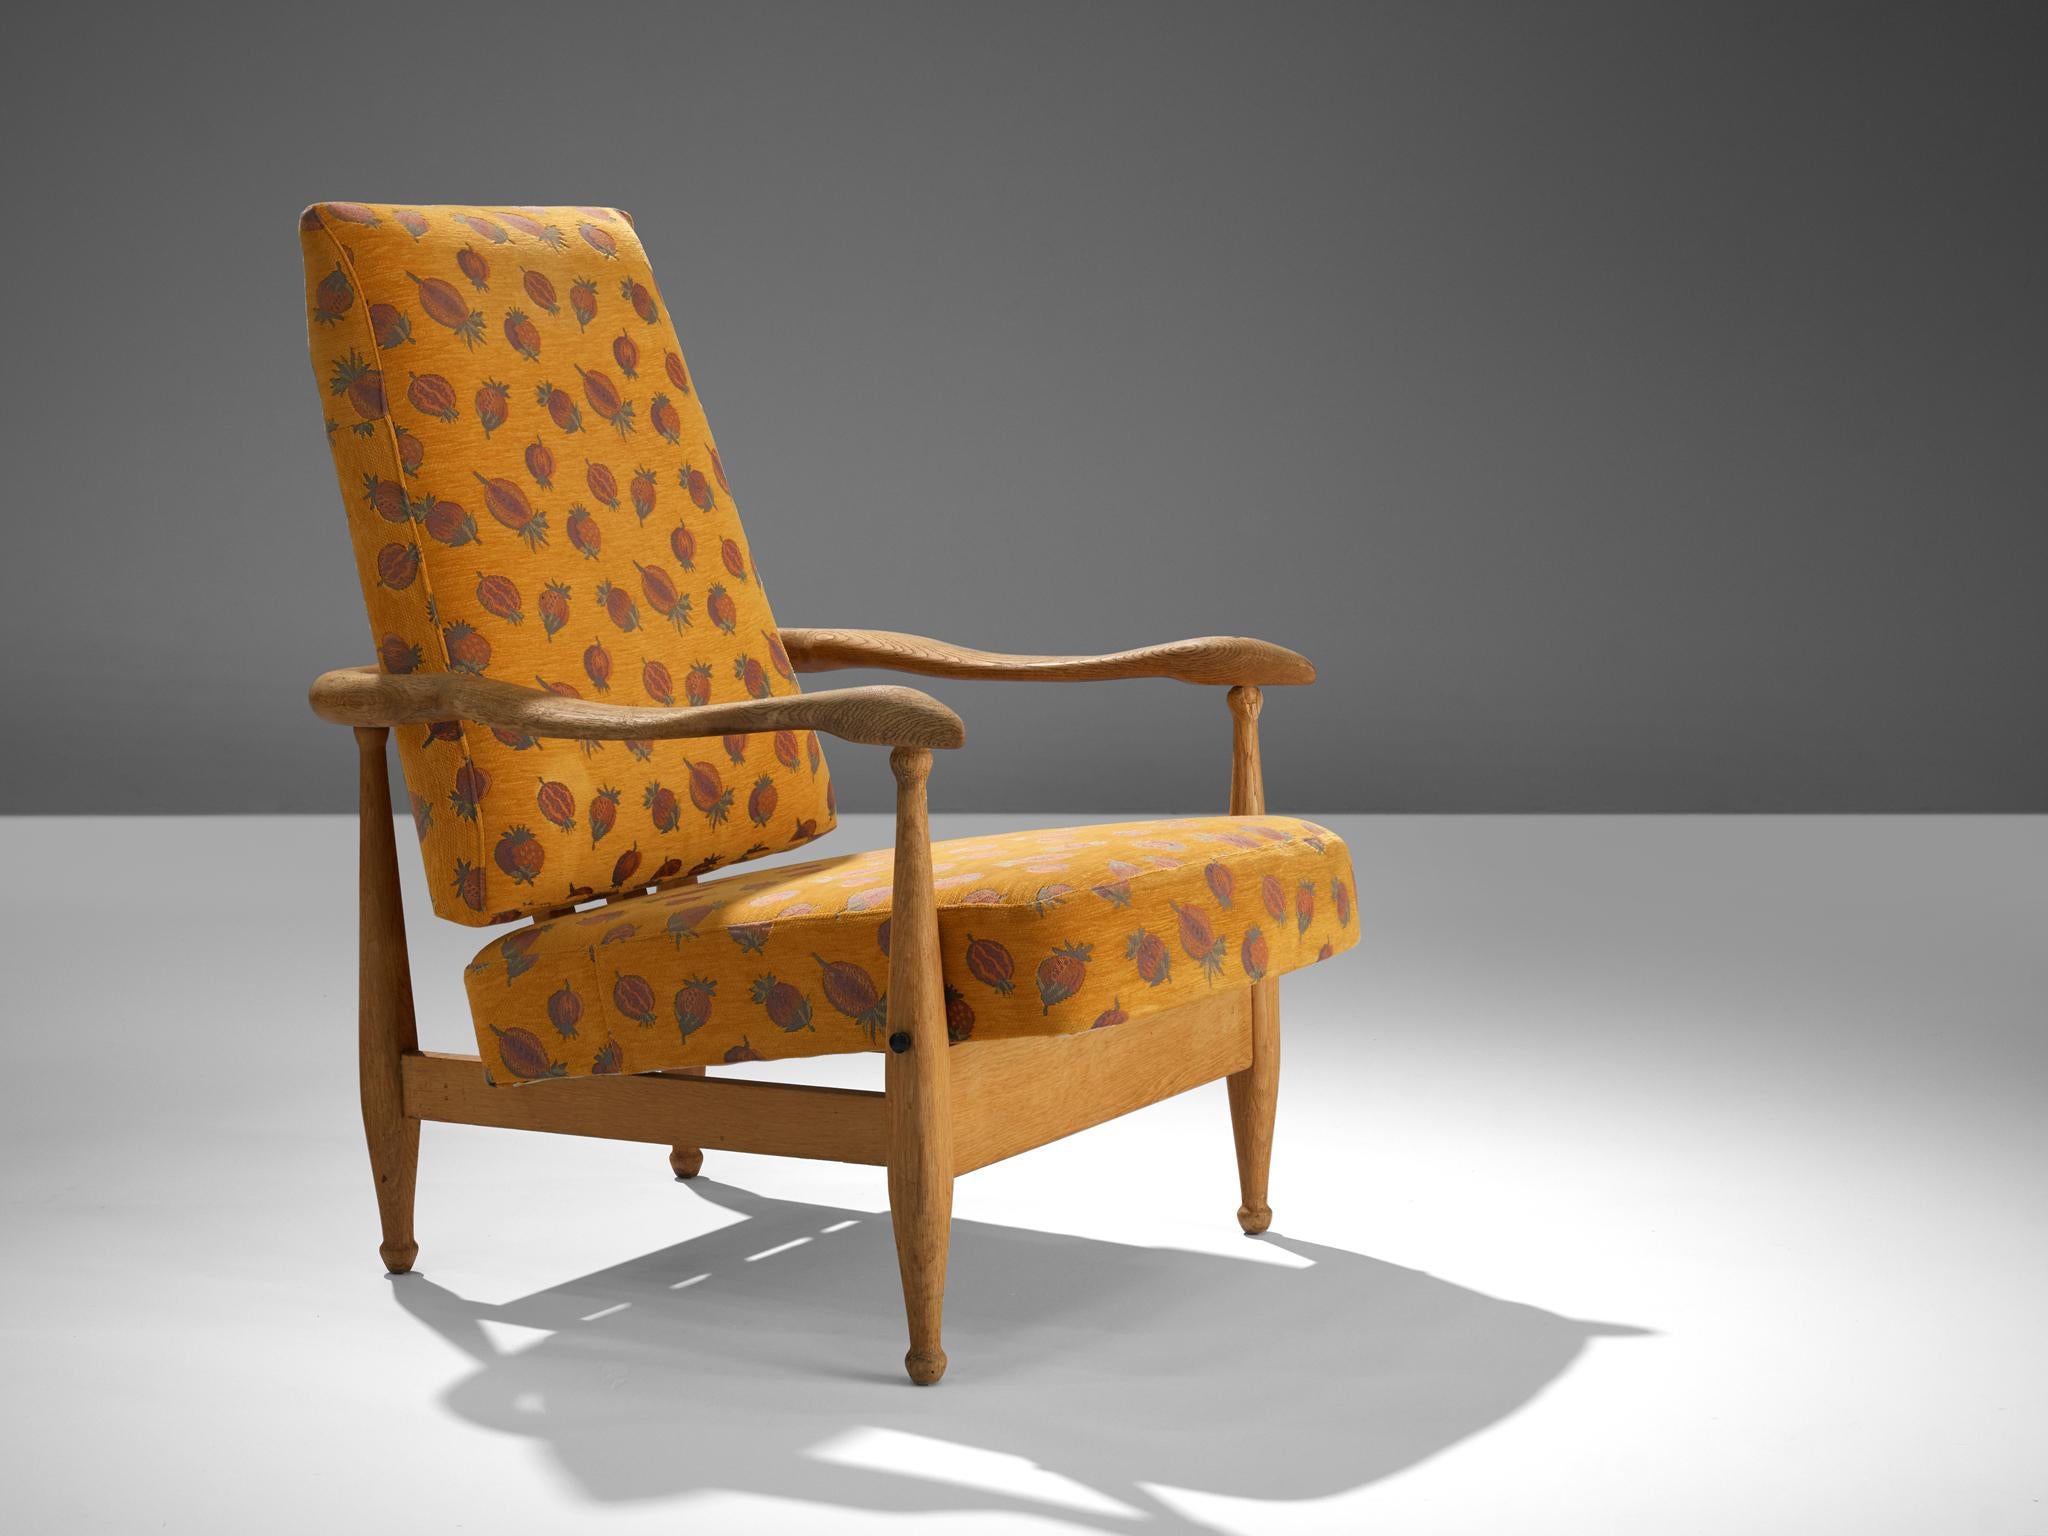 Guillerme et Chambron, lounge chair 'Dagobert'/'Air France', orange patterned upholstery, oak, France, 1960s.

Guillerme and Chambron are known for their high quality solid oak furniture, of which this lounge chair is another great example. It has